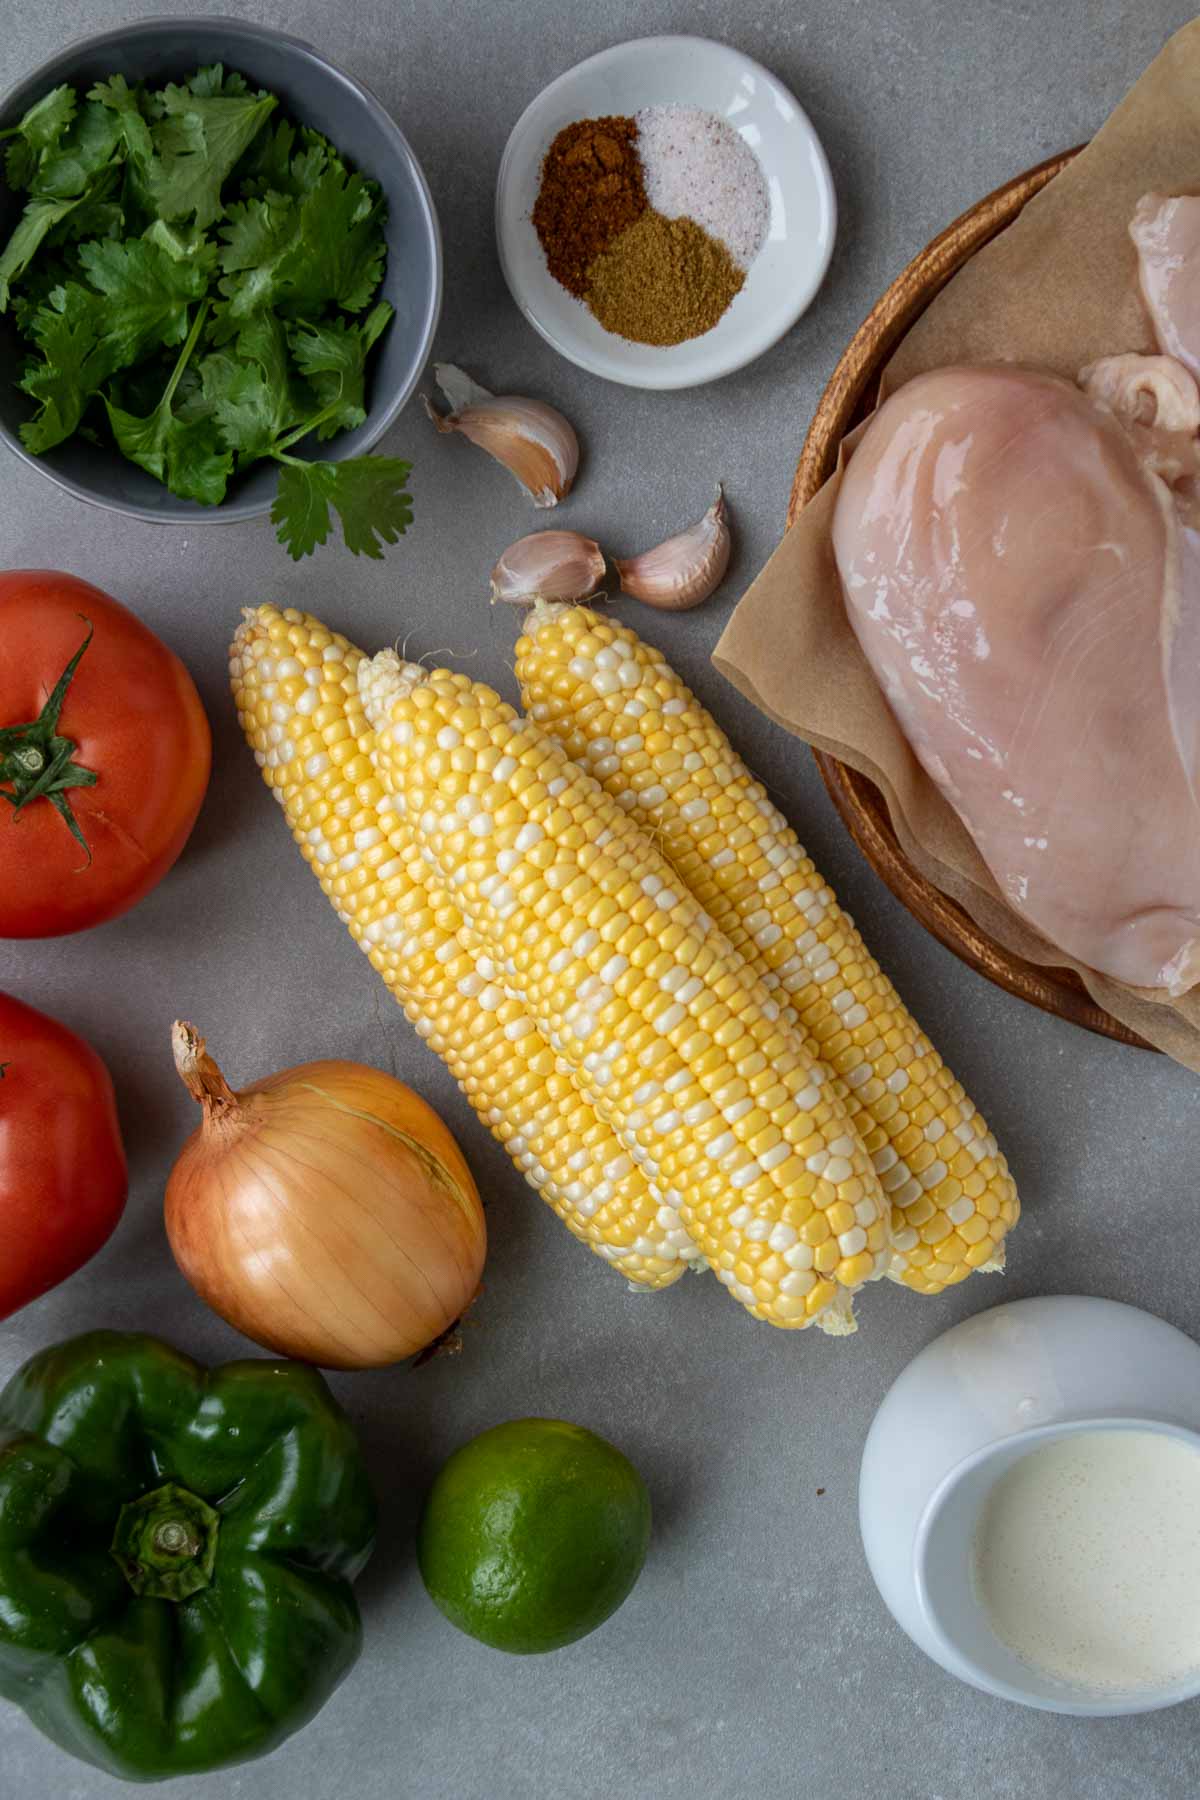 Ingredients for Mexican corn chicken soup; chicken breasts, fresh sweet corn, tomatoes, onion, garlic, green bell pepper, cilantro, cumin, chili powder, salt, and heavy cream.